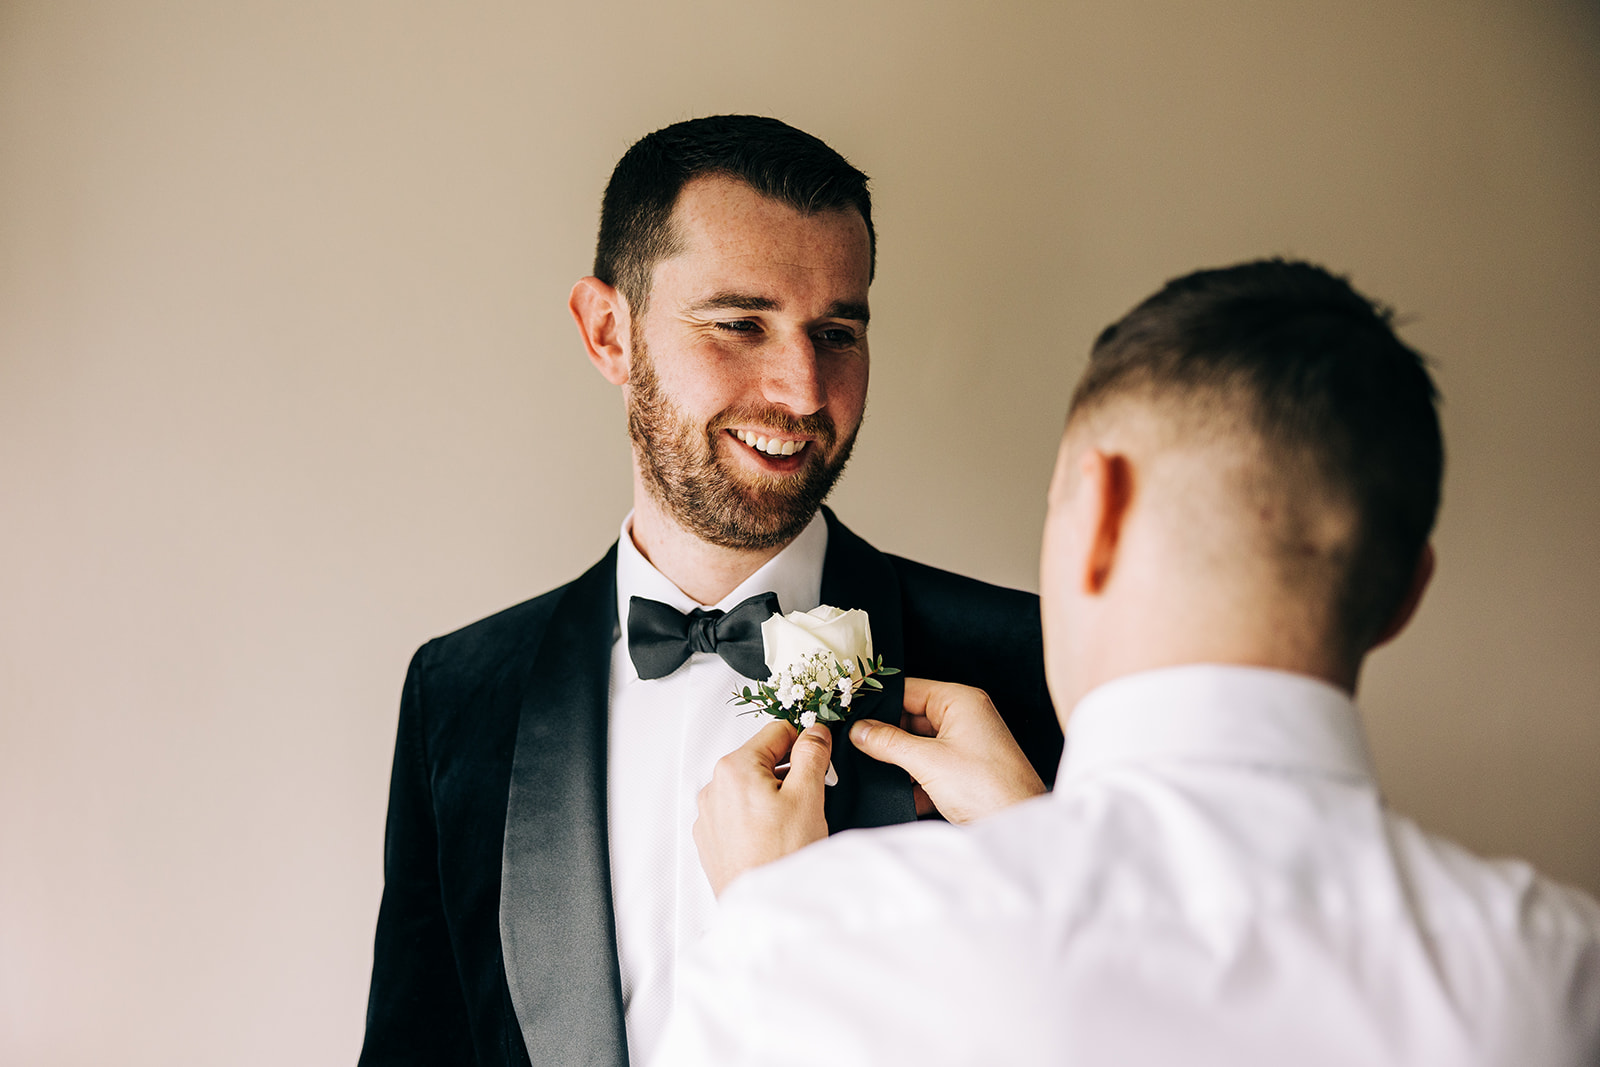 Seán has his groom man pin in his buttonhole flower